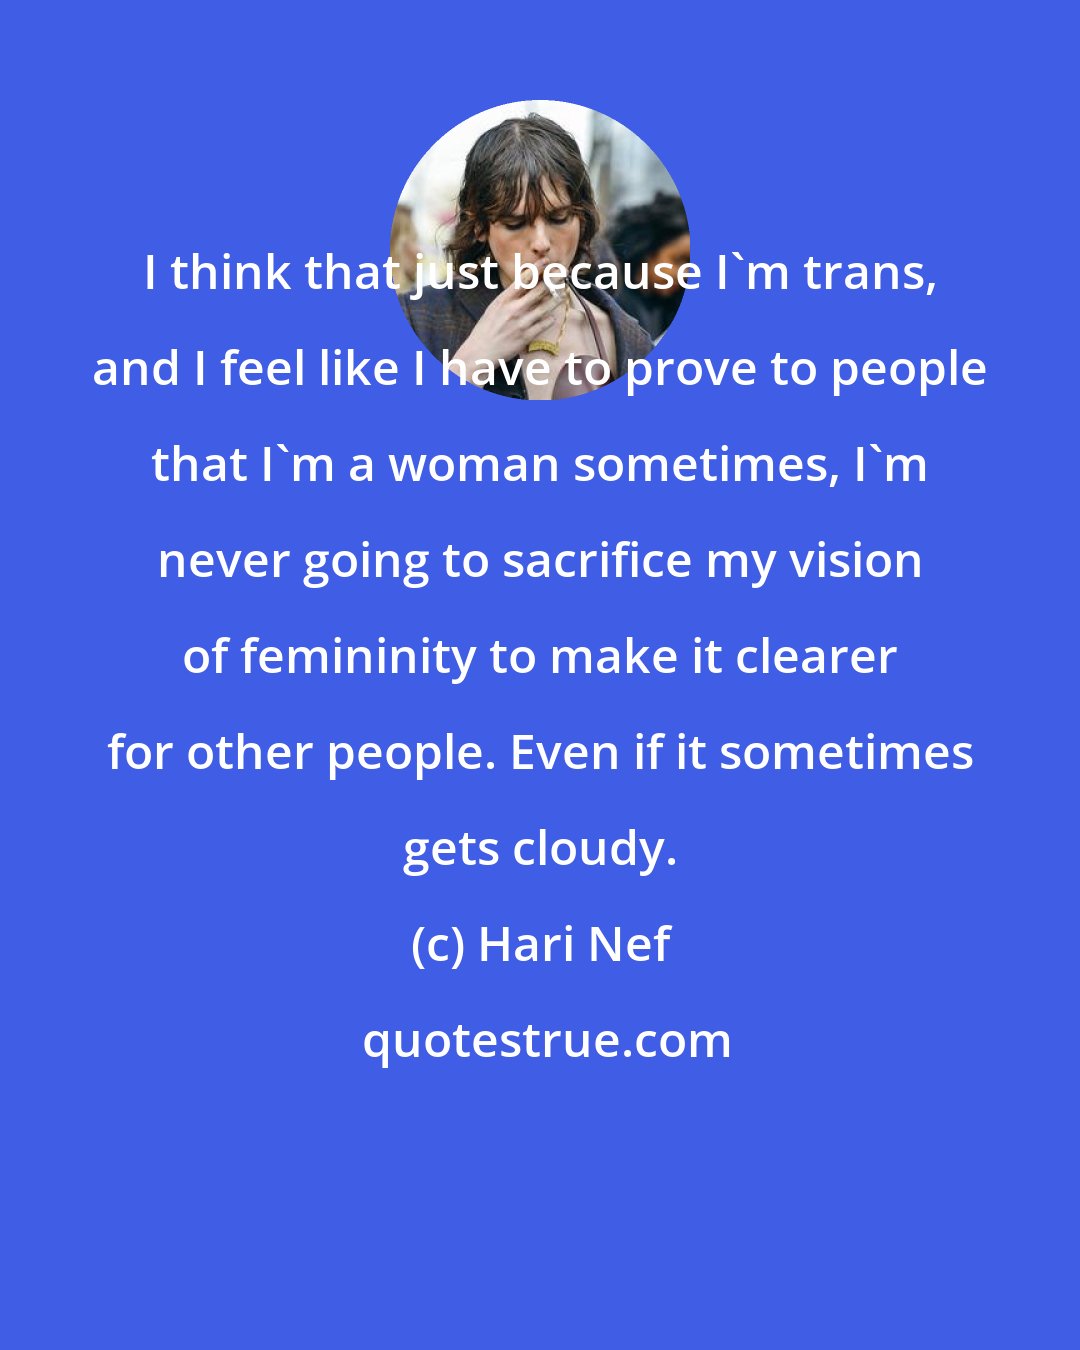 Hari Nef: I think that just because I'm trans, and I feel like I have to prove to people that I'm a woman sometimes, I'm never going to sacrifice my vision of femininity to make it clearer for other people. Even if it sometimes gets cloudy.